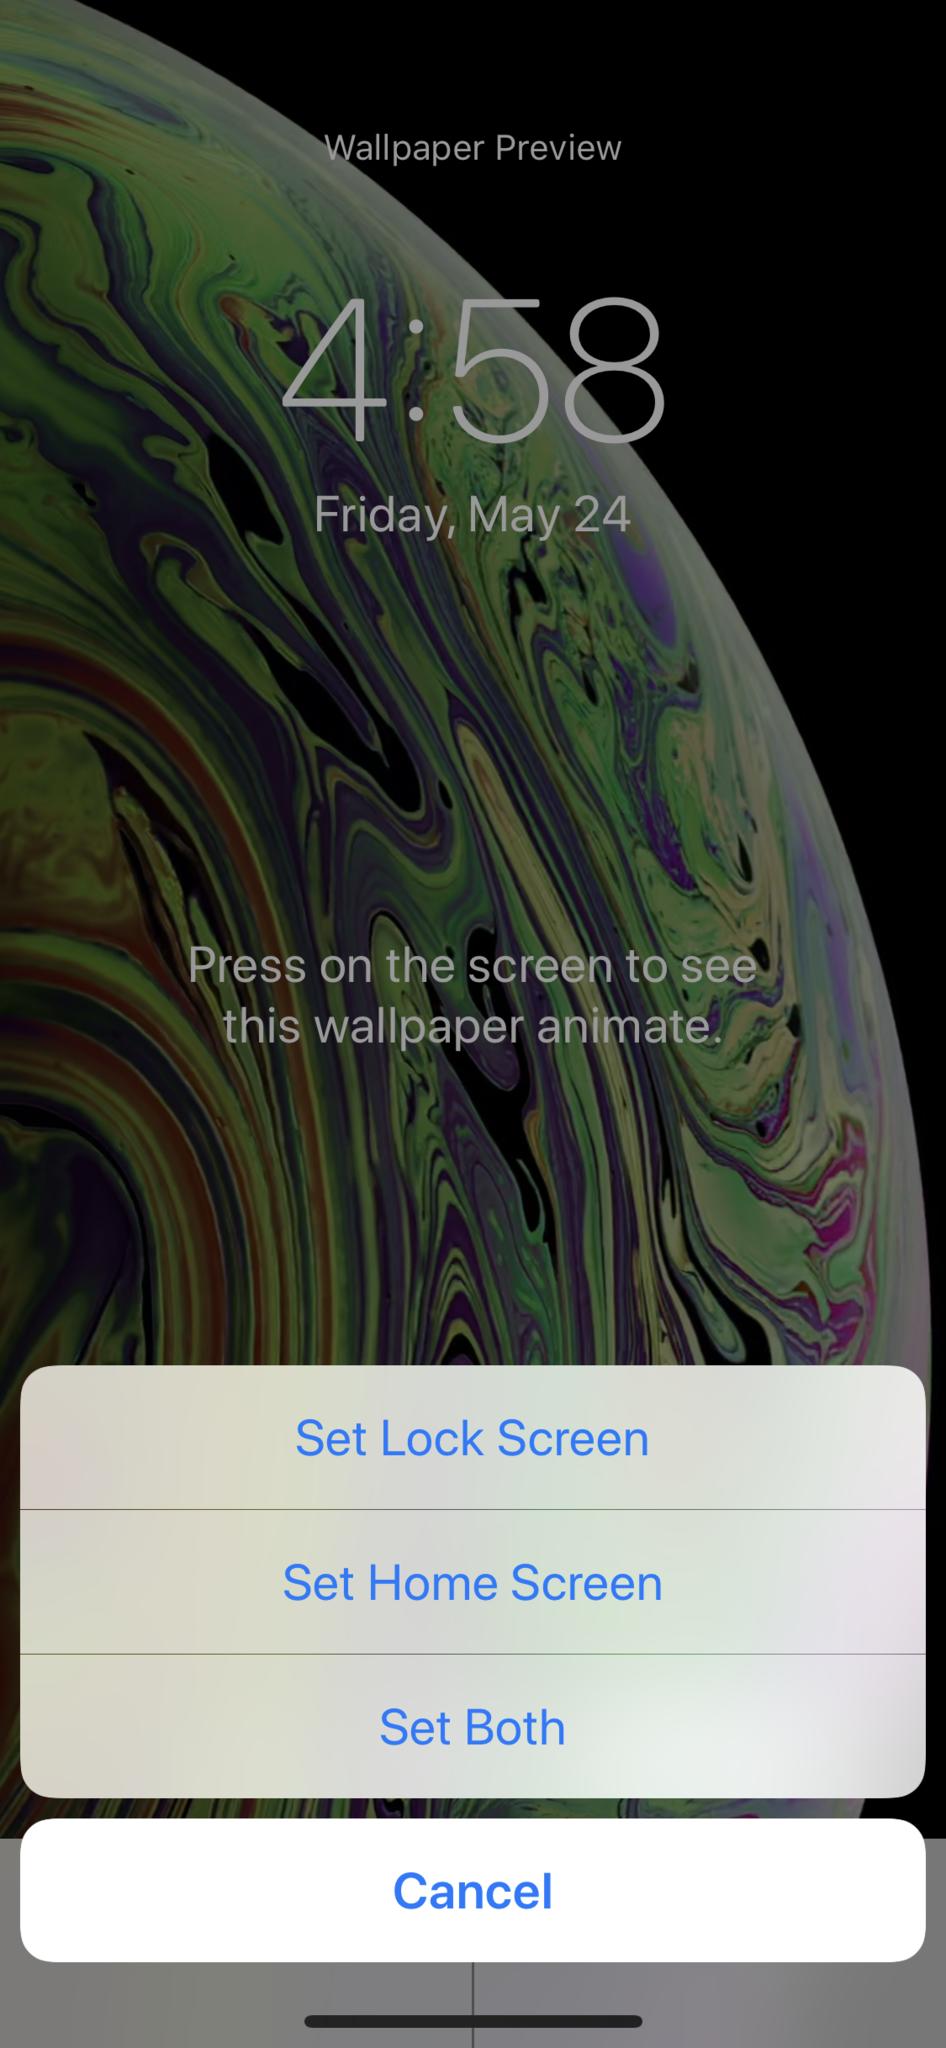 change your wallpaper on iPhone or iPad